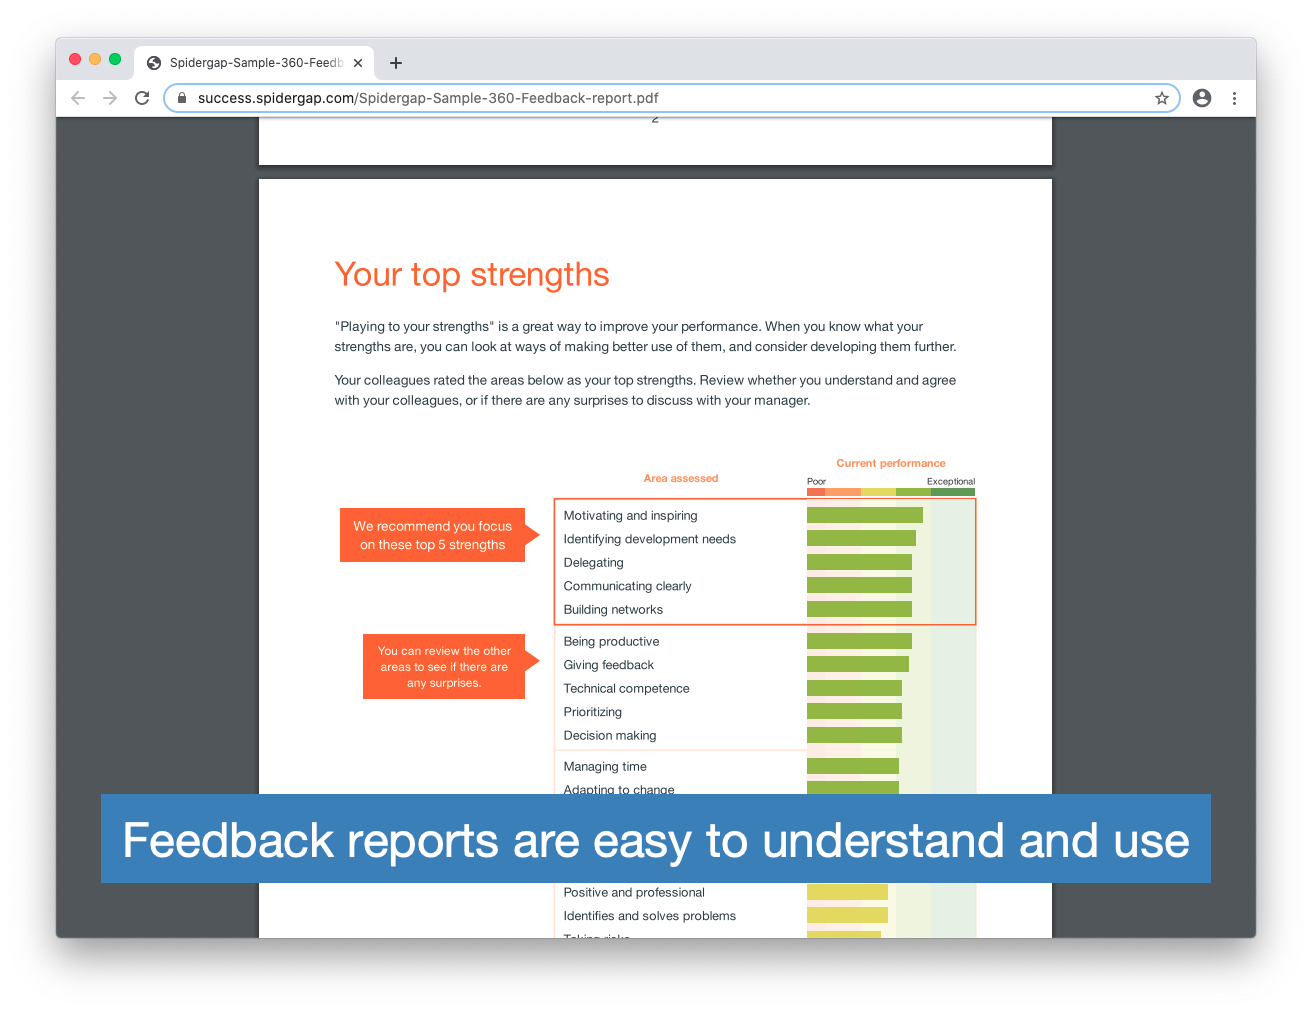 Feedback reports are easy to understand and use